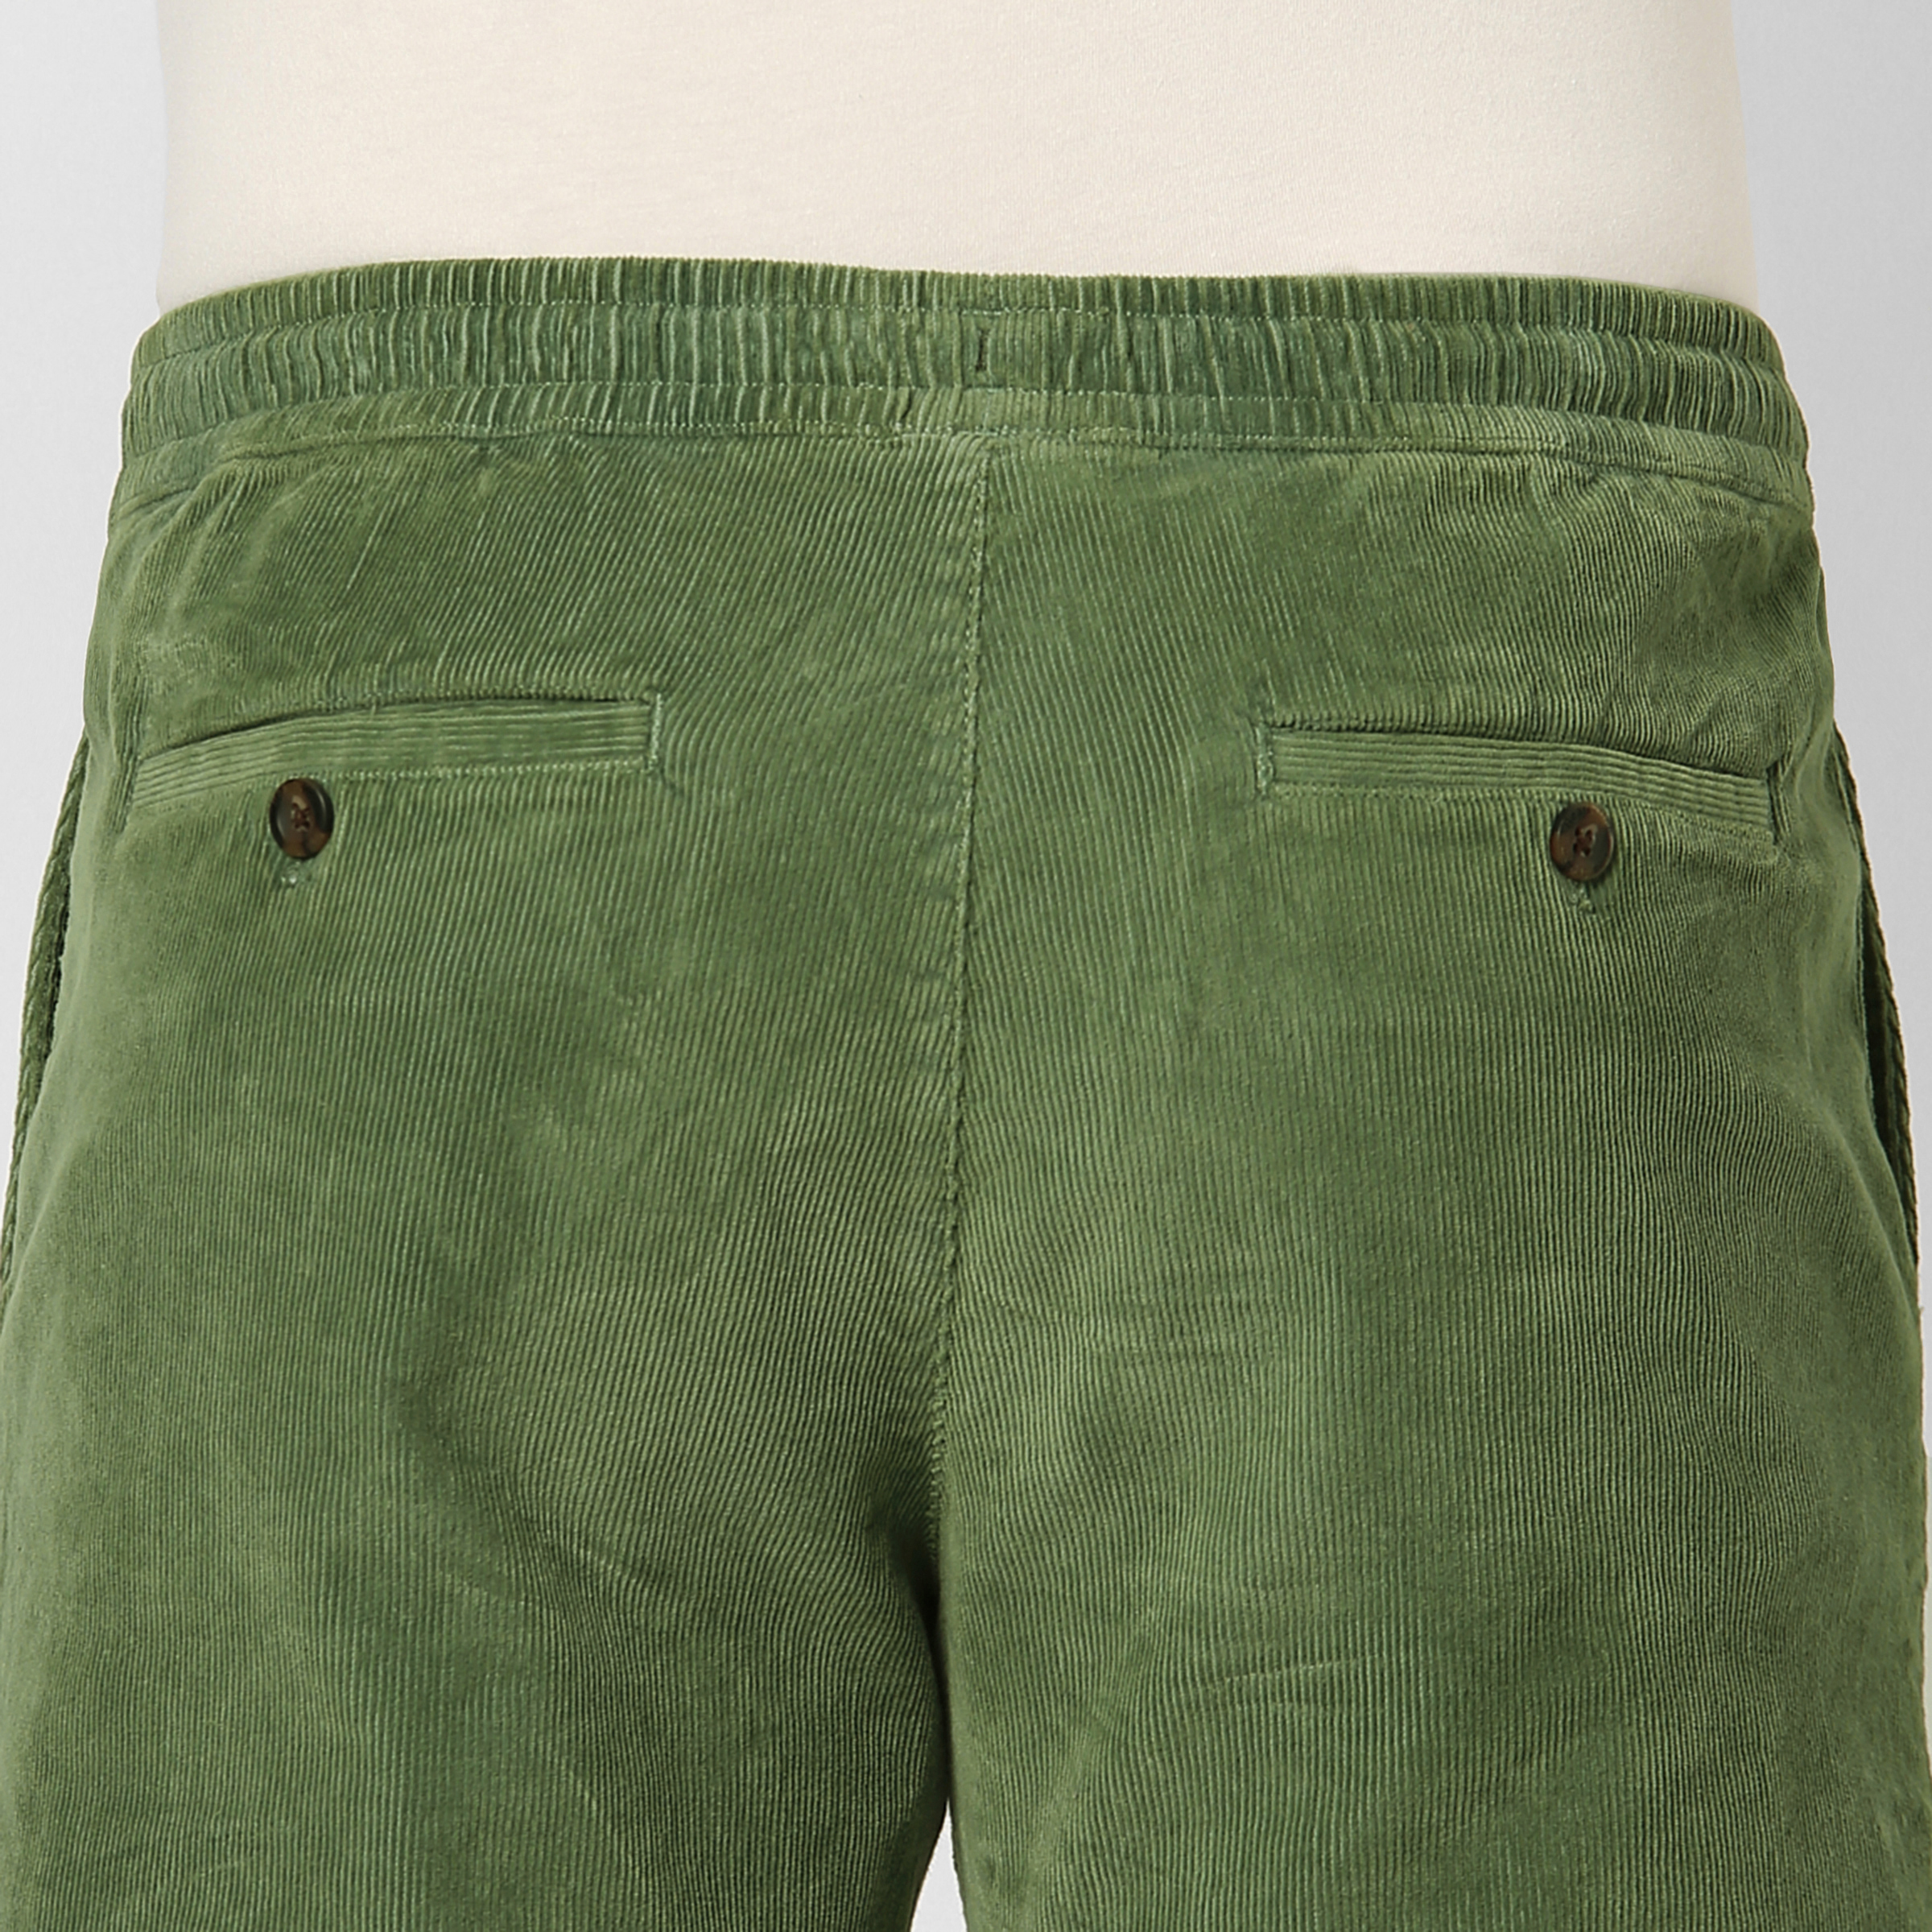 Corduroy Easy Pant Cactus close up back button pockets on model